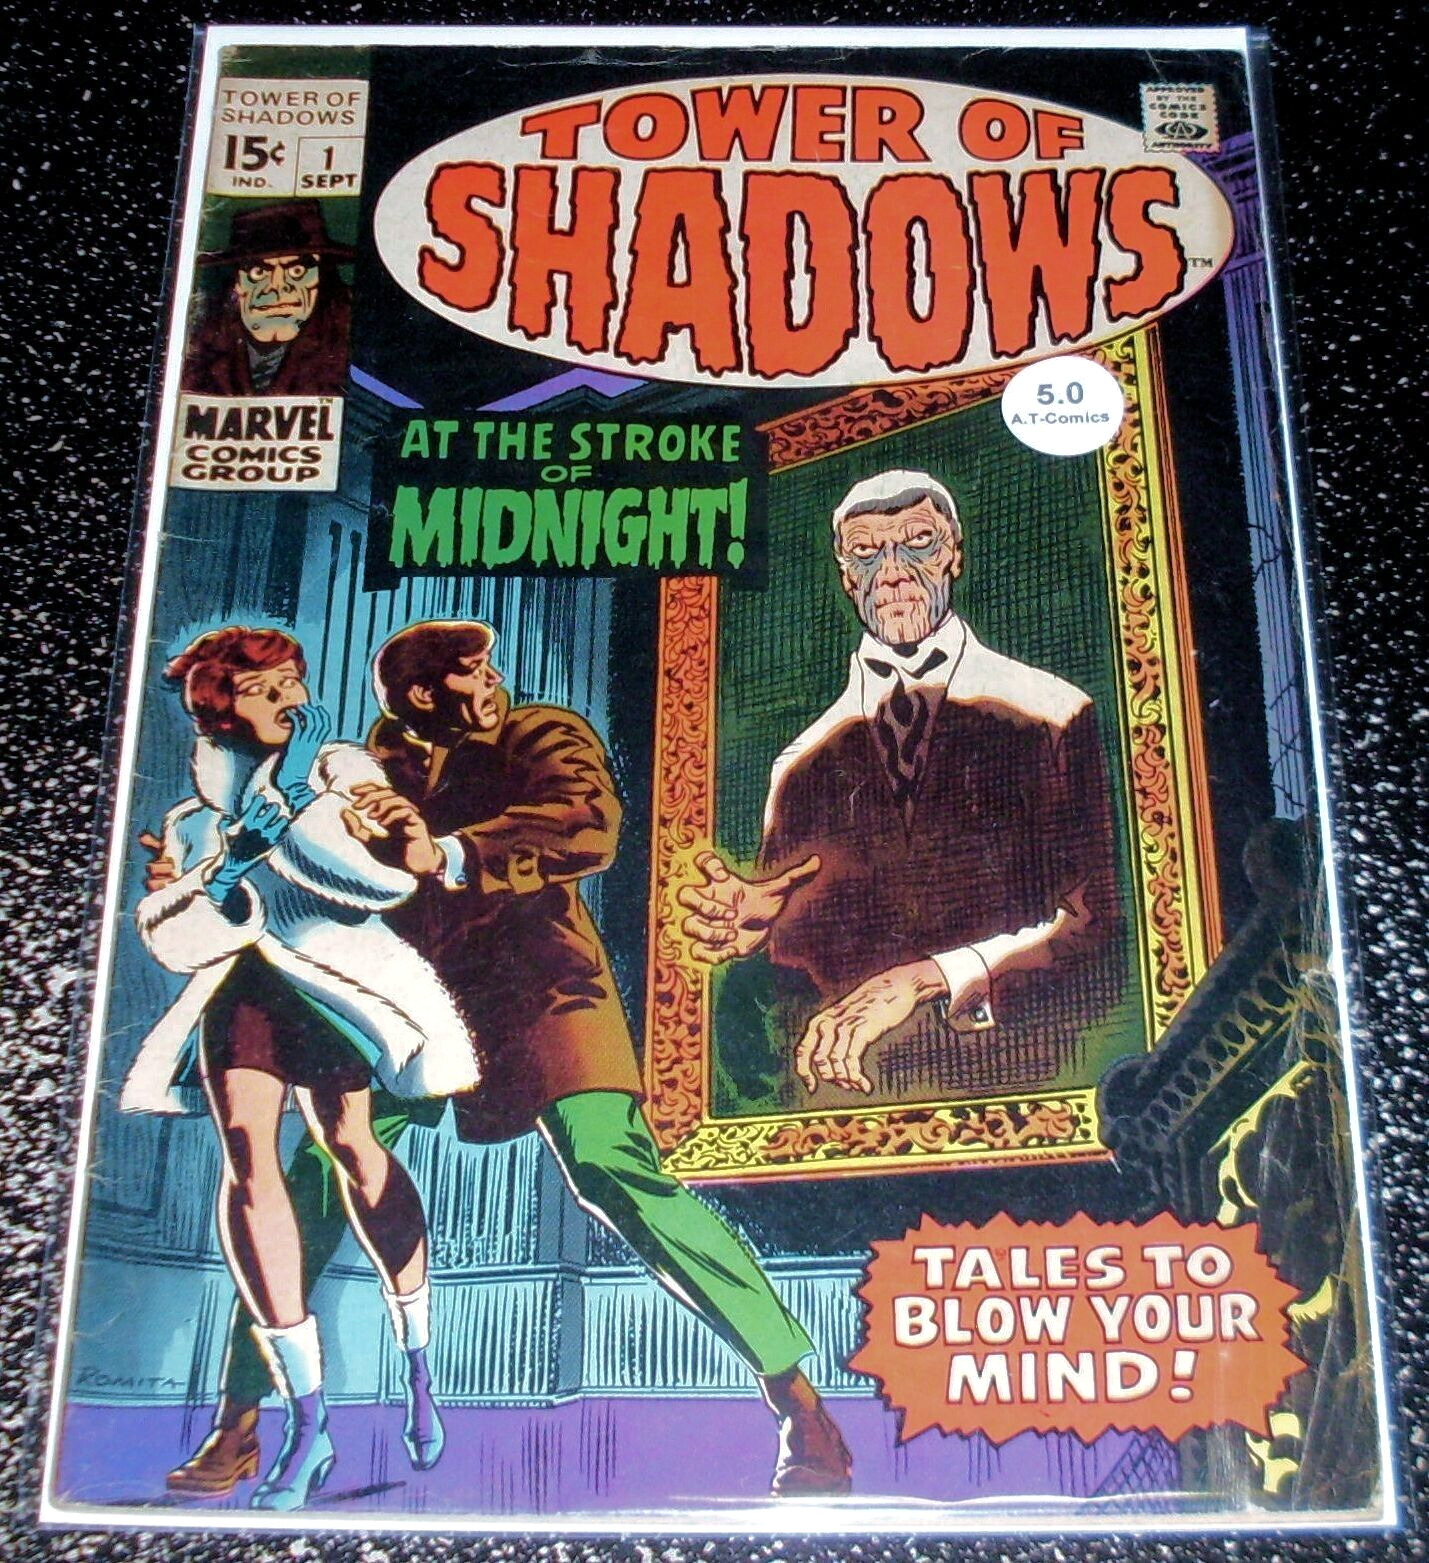 Tower of Shadows 1 (5.0) 1st Print 1969 Marvel Comics - Flat Rate Shipping